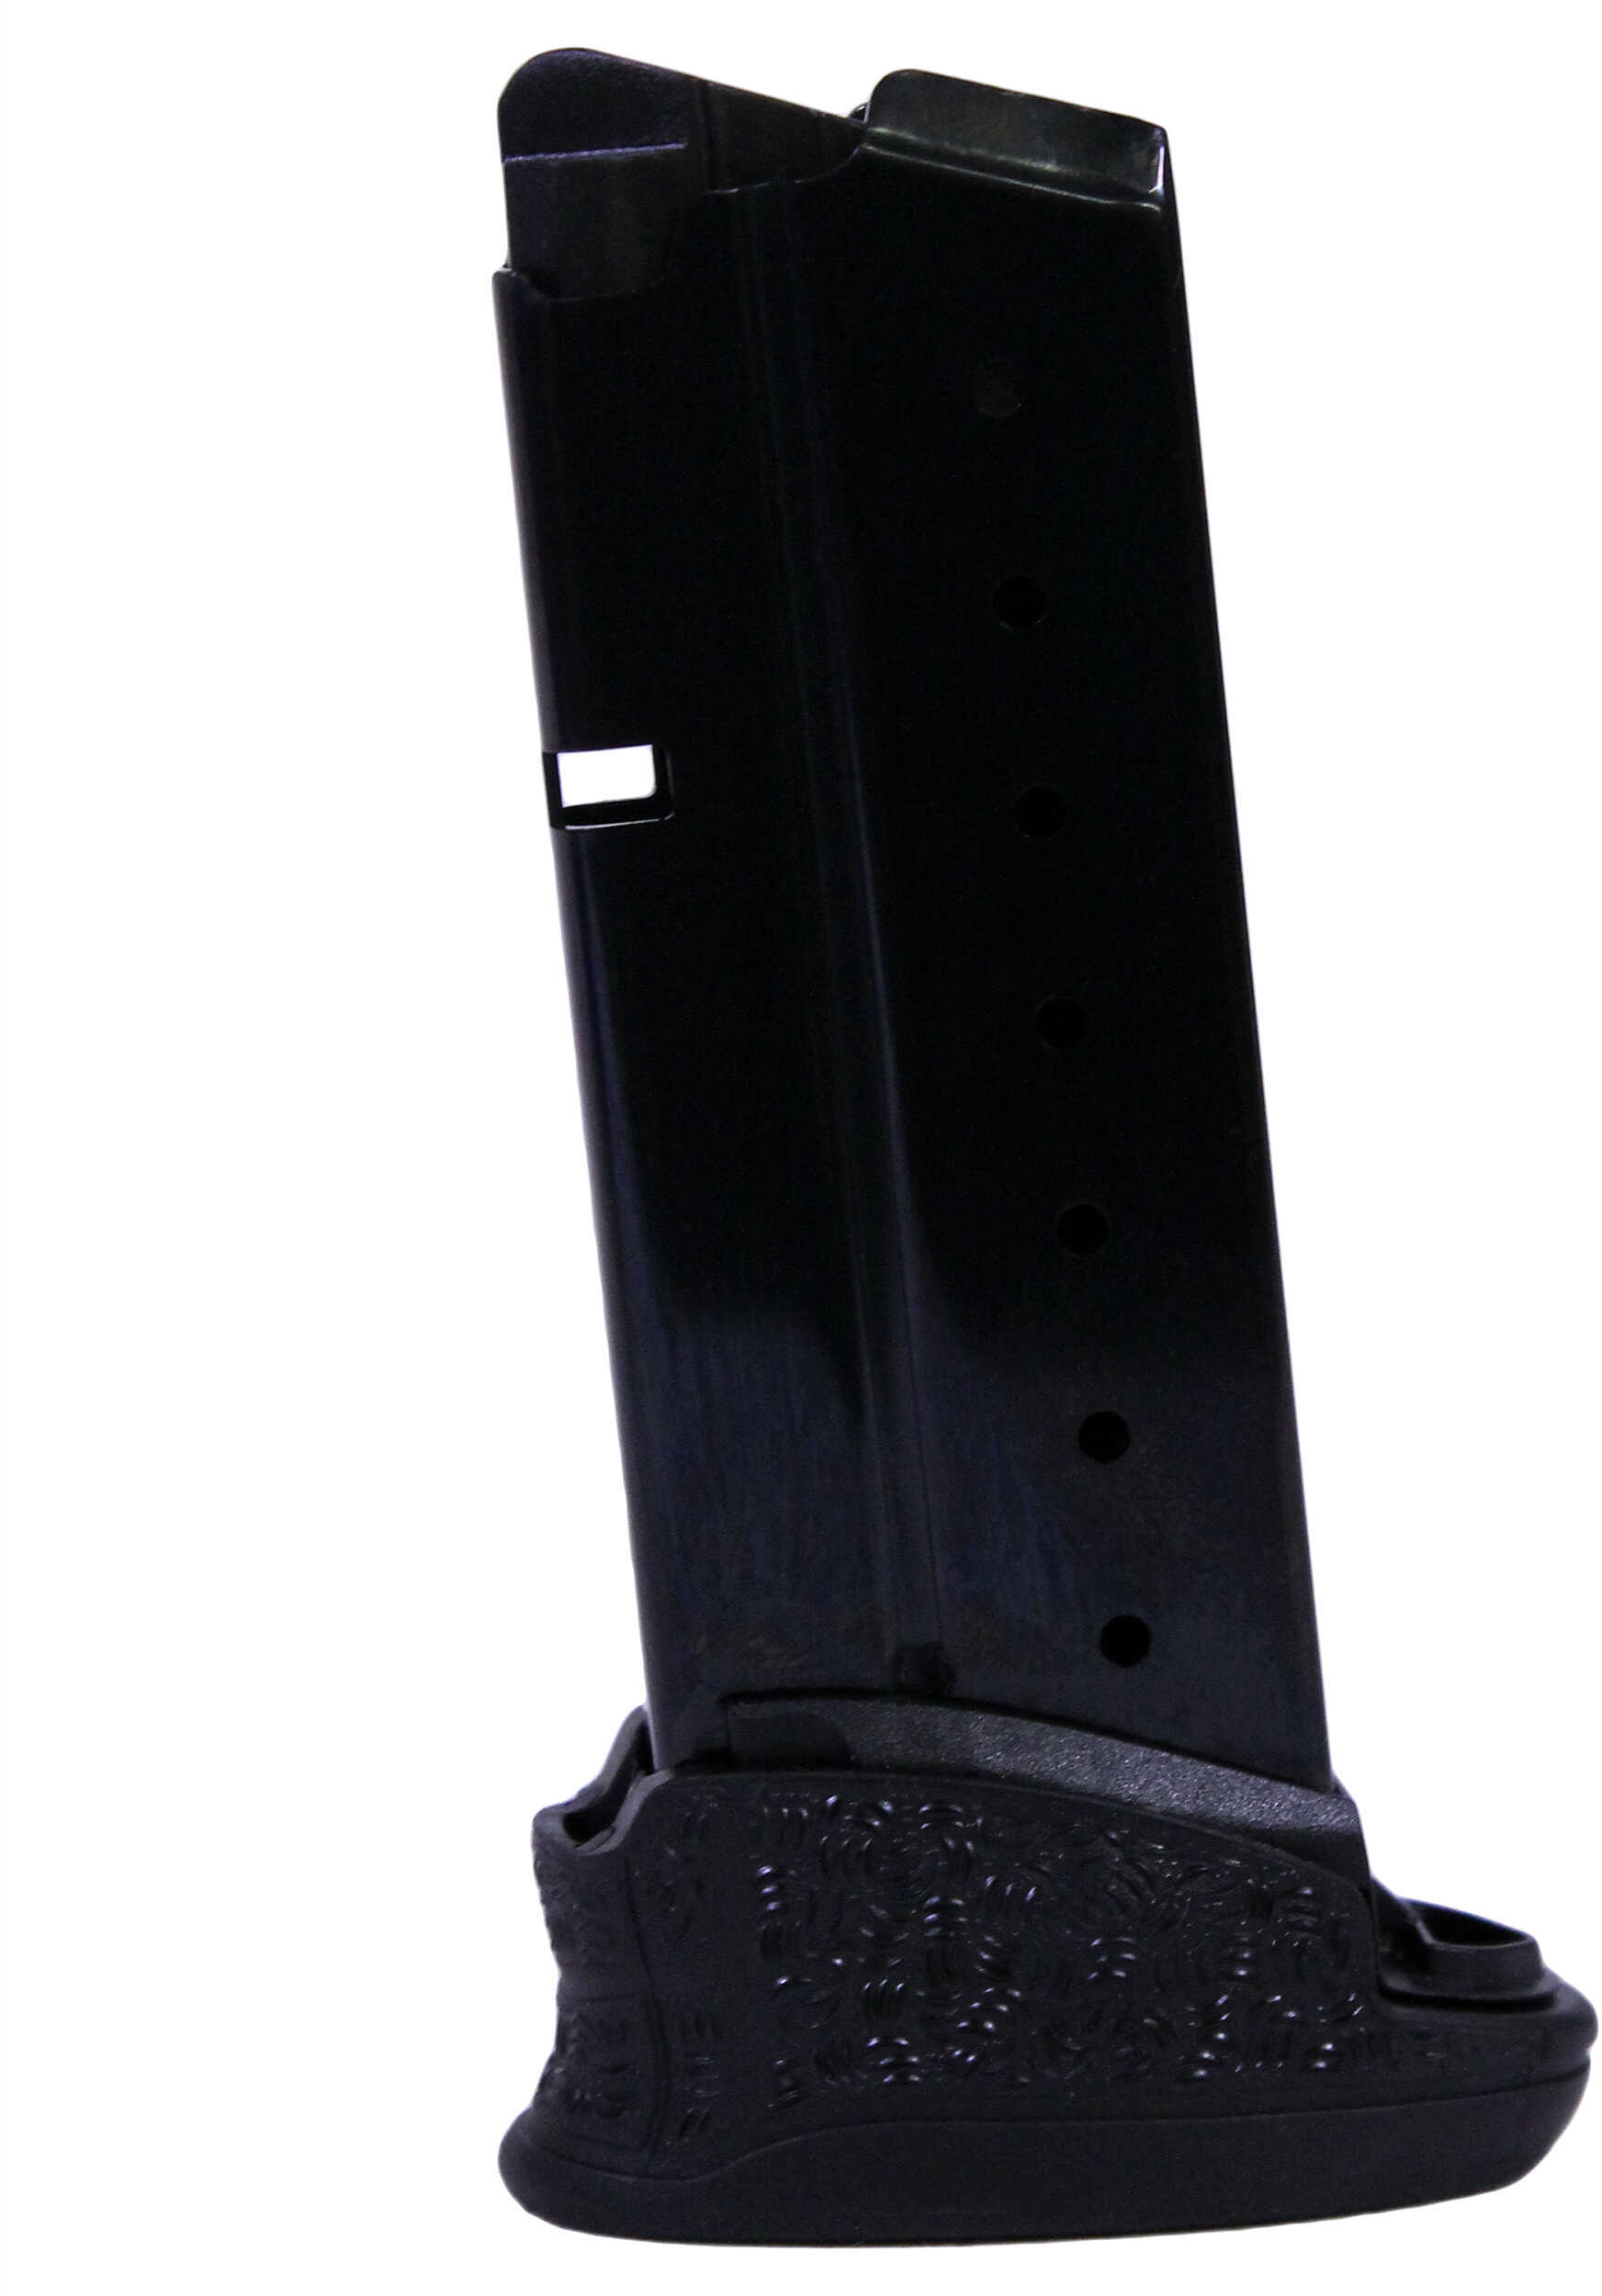 Walther Magazine Pps M2 9MM Luger 7-ROUNDS Blued Steel